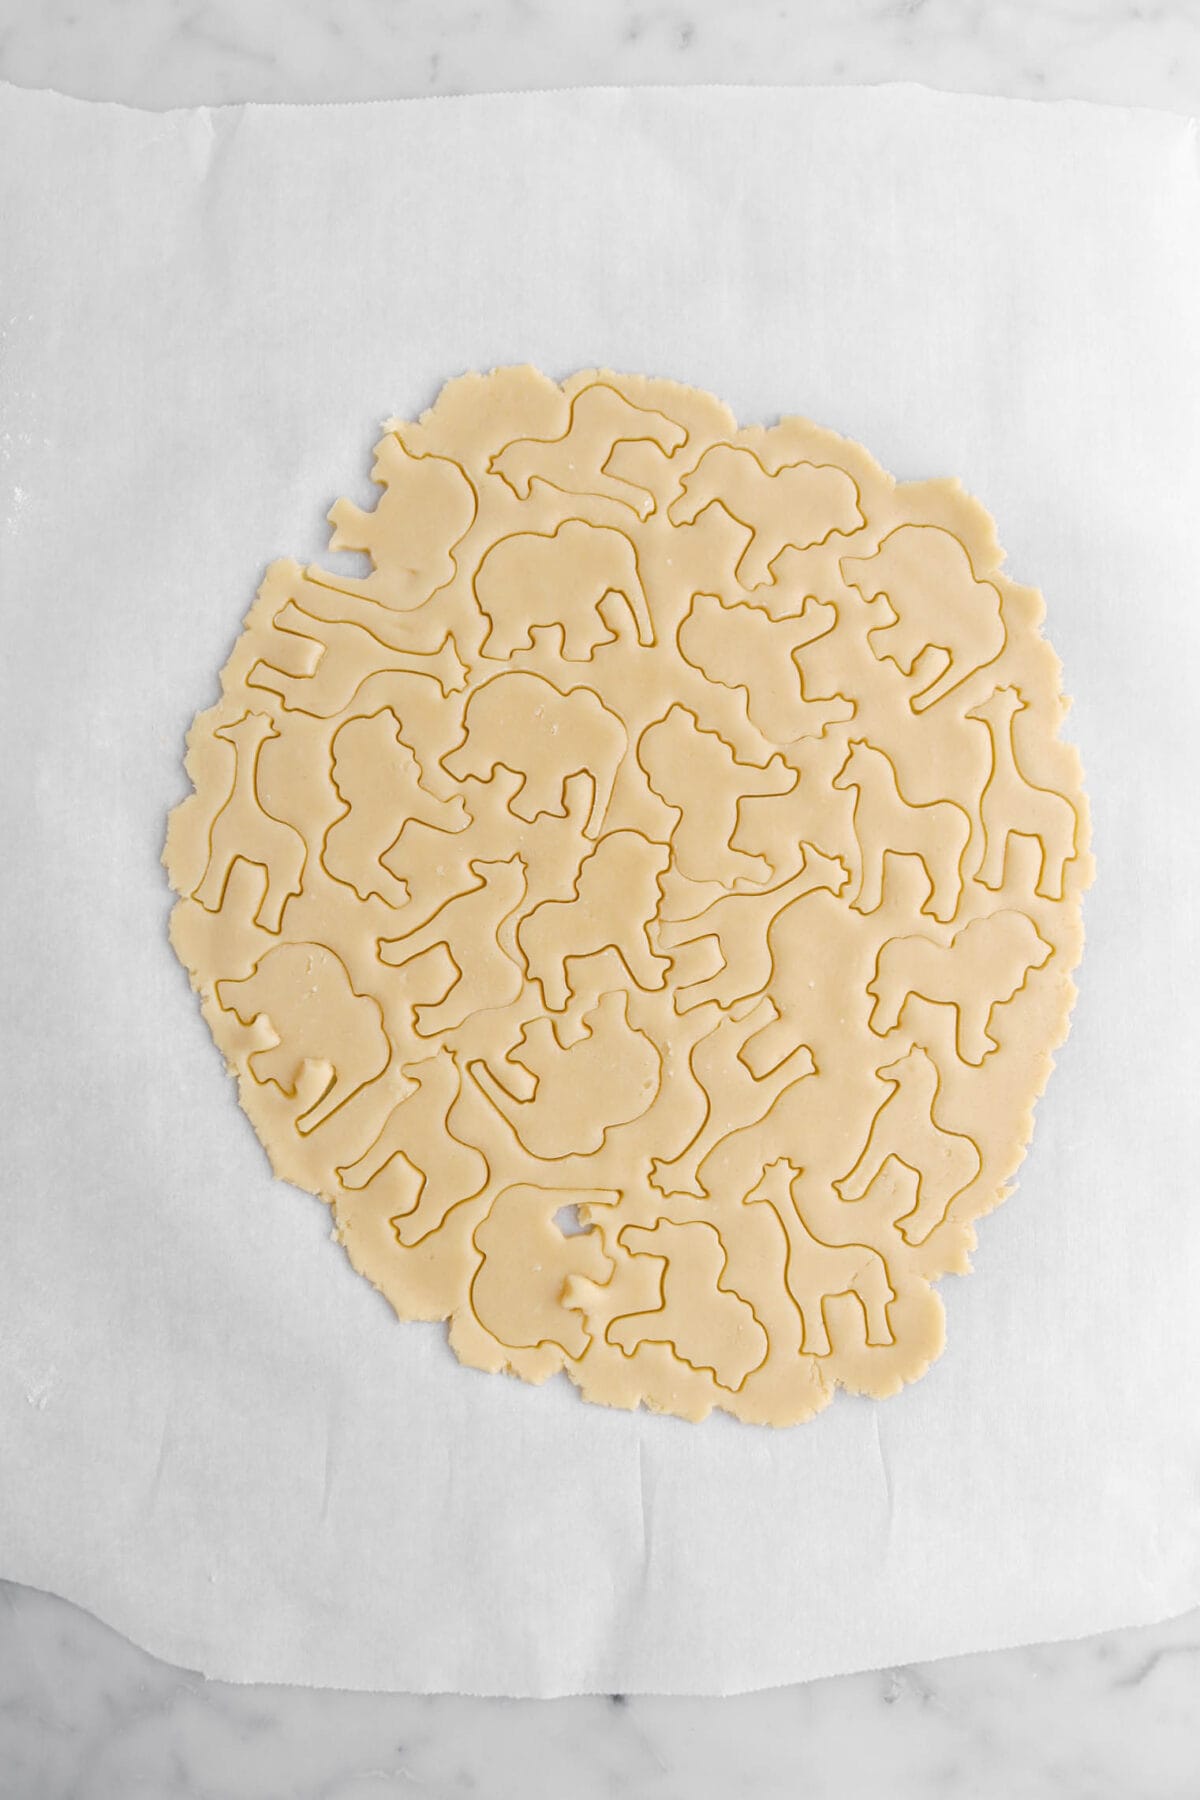 animal shapes cut into cookie dough.